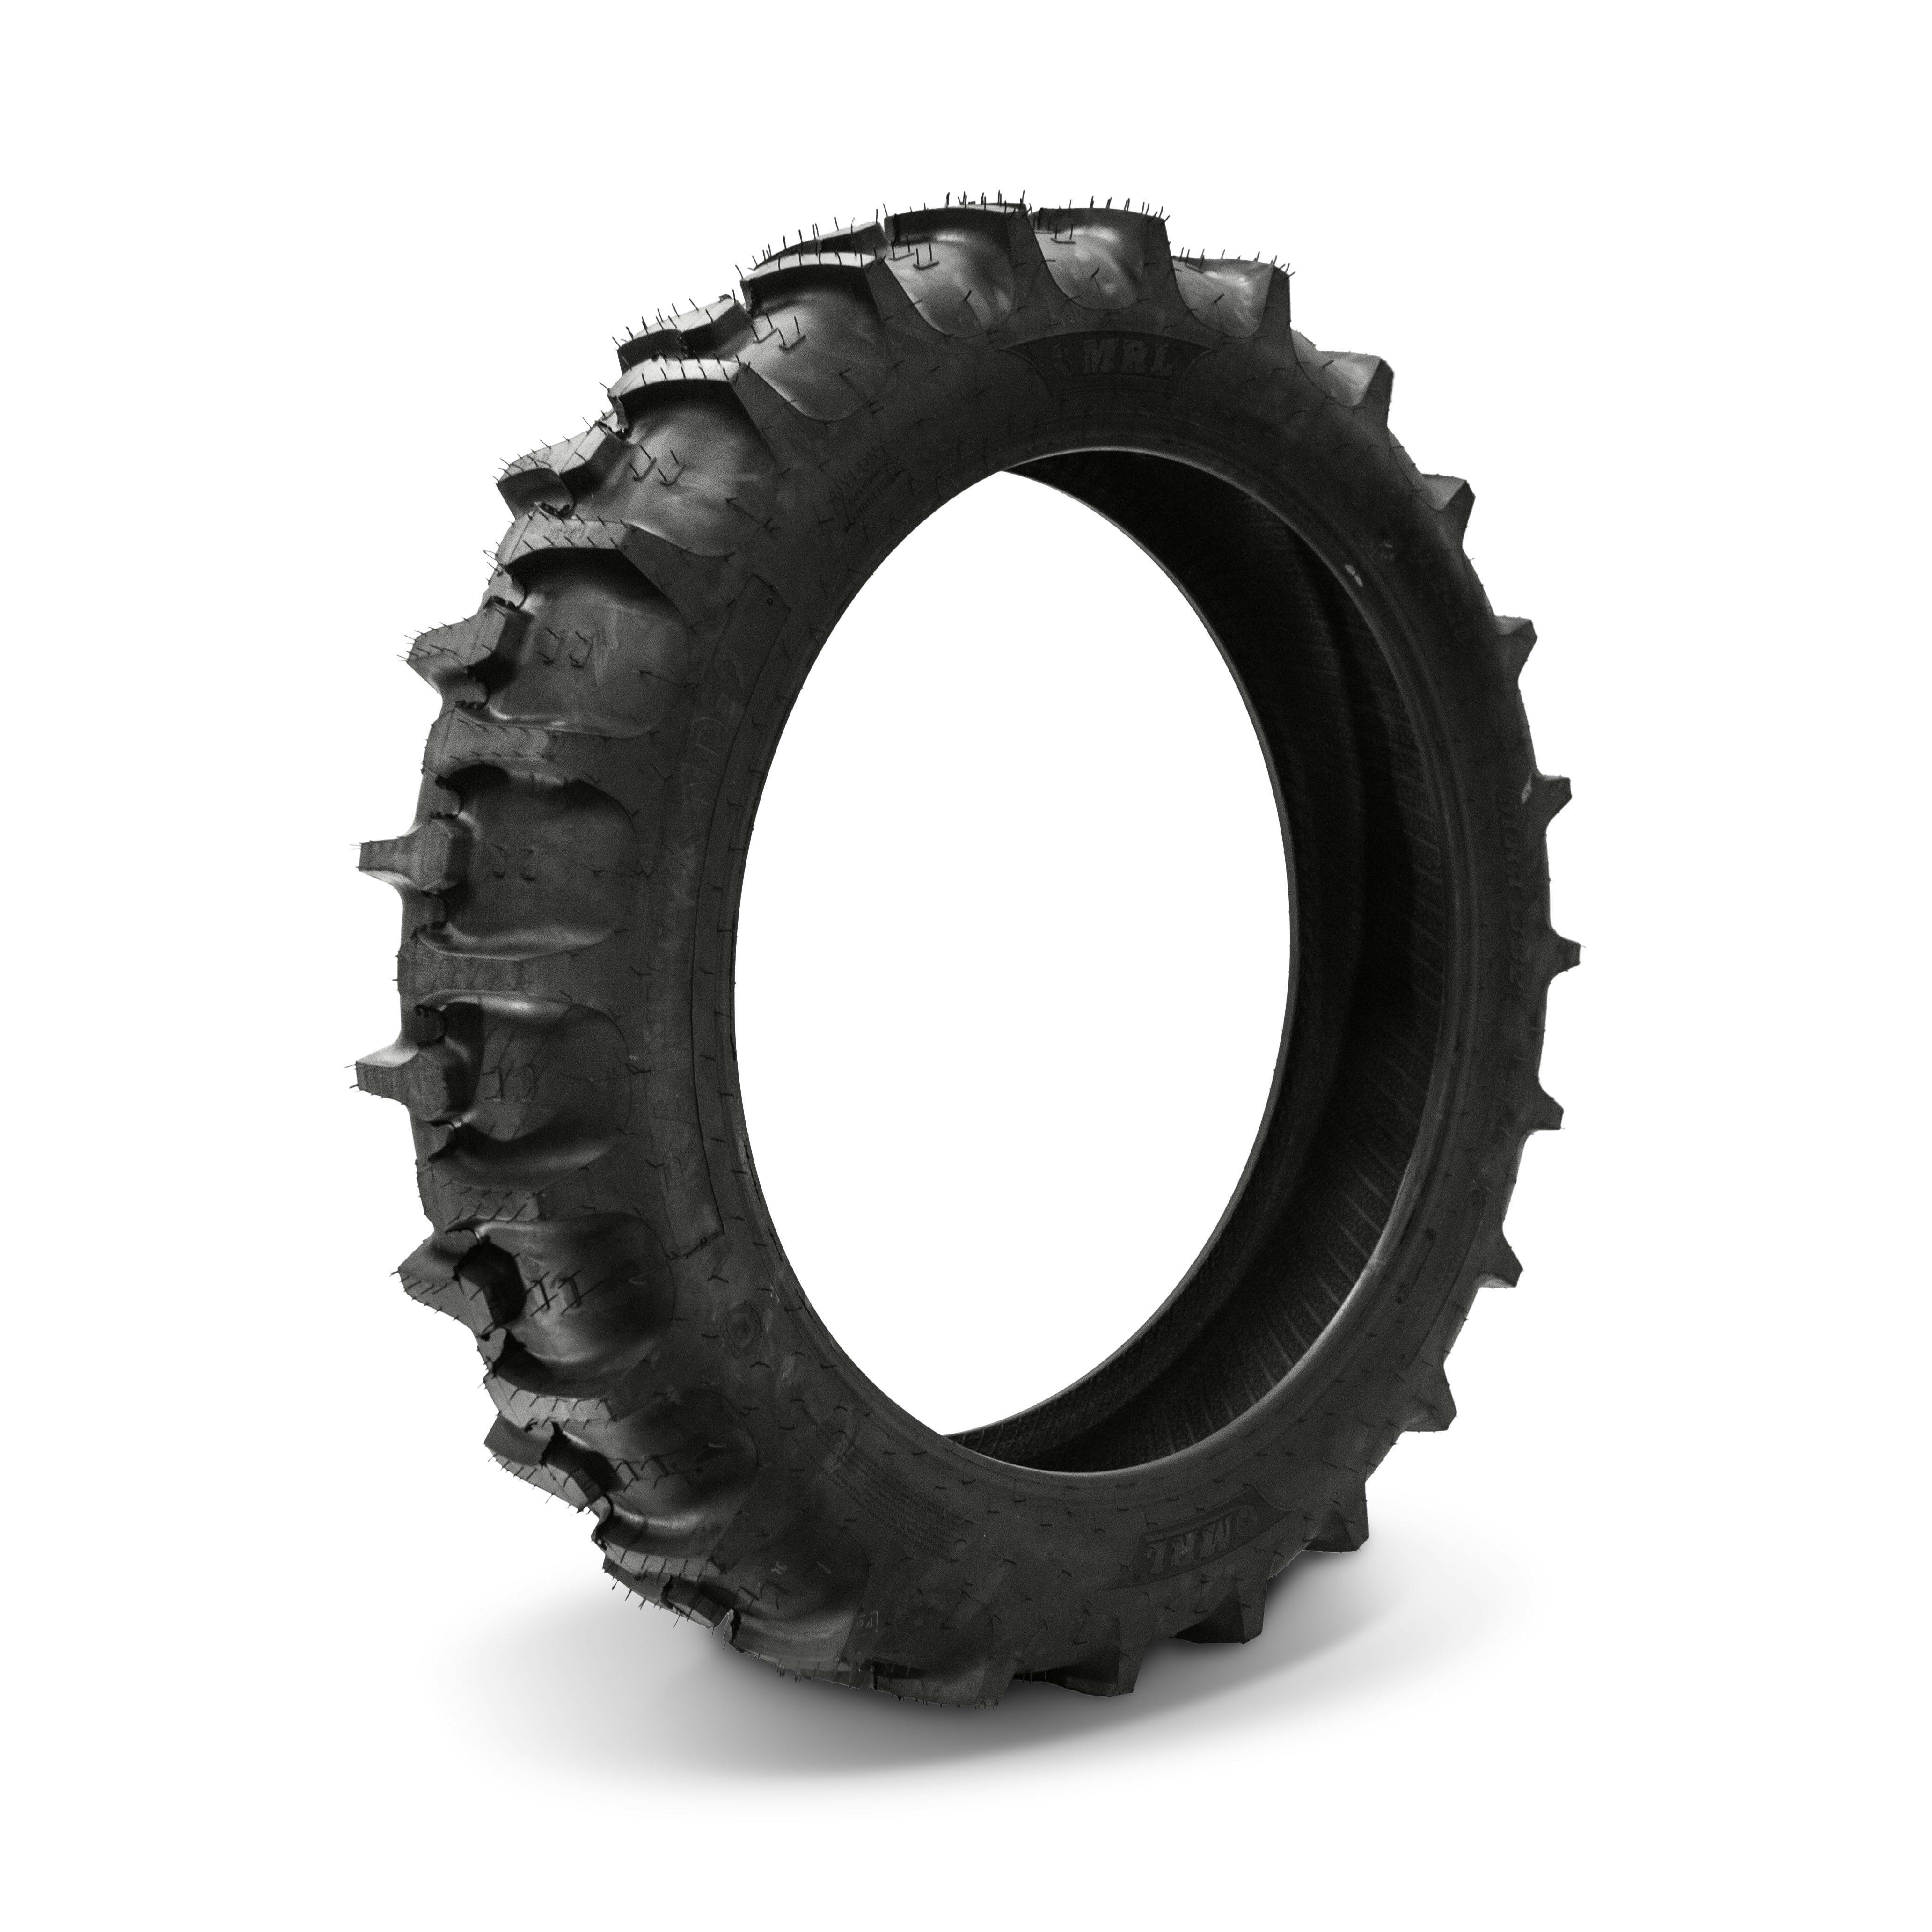 The Rainmax N/D line has a non-directional tread pattern that maximizes traction in either direction of travel.